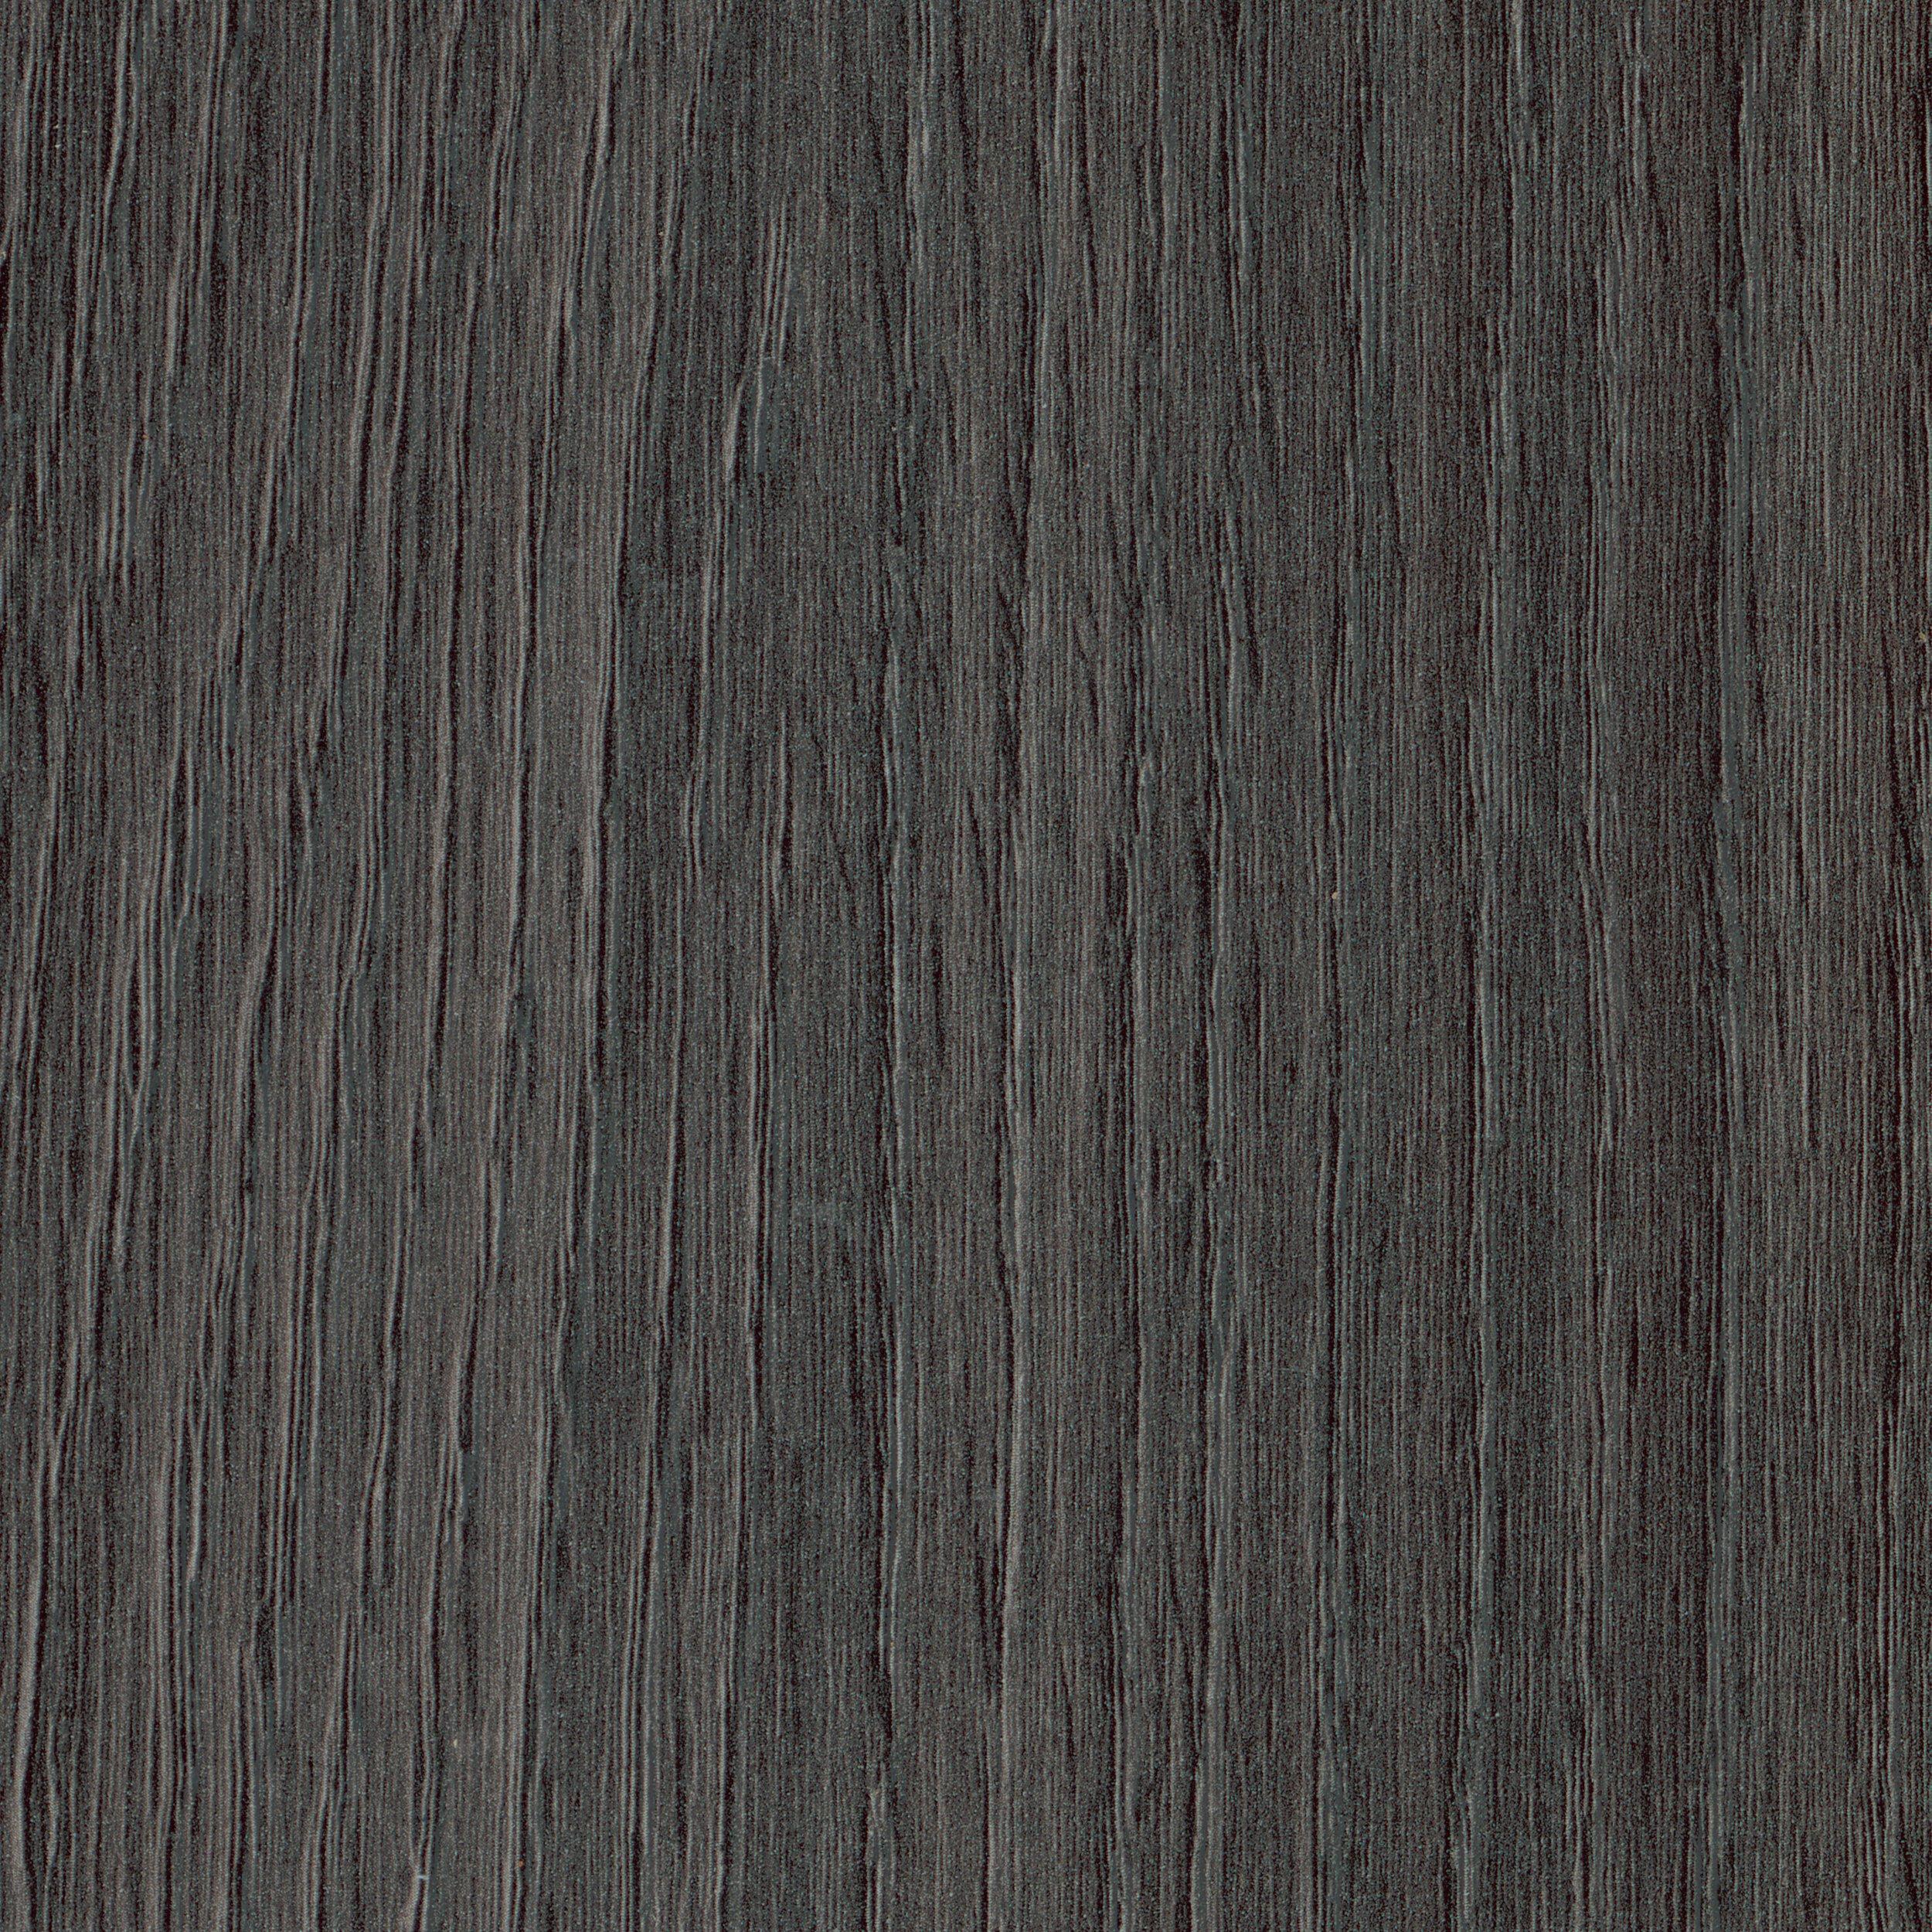 Shaded Dark Umber 94in. Laminate Overlapping Stair Nose